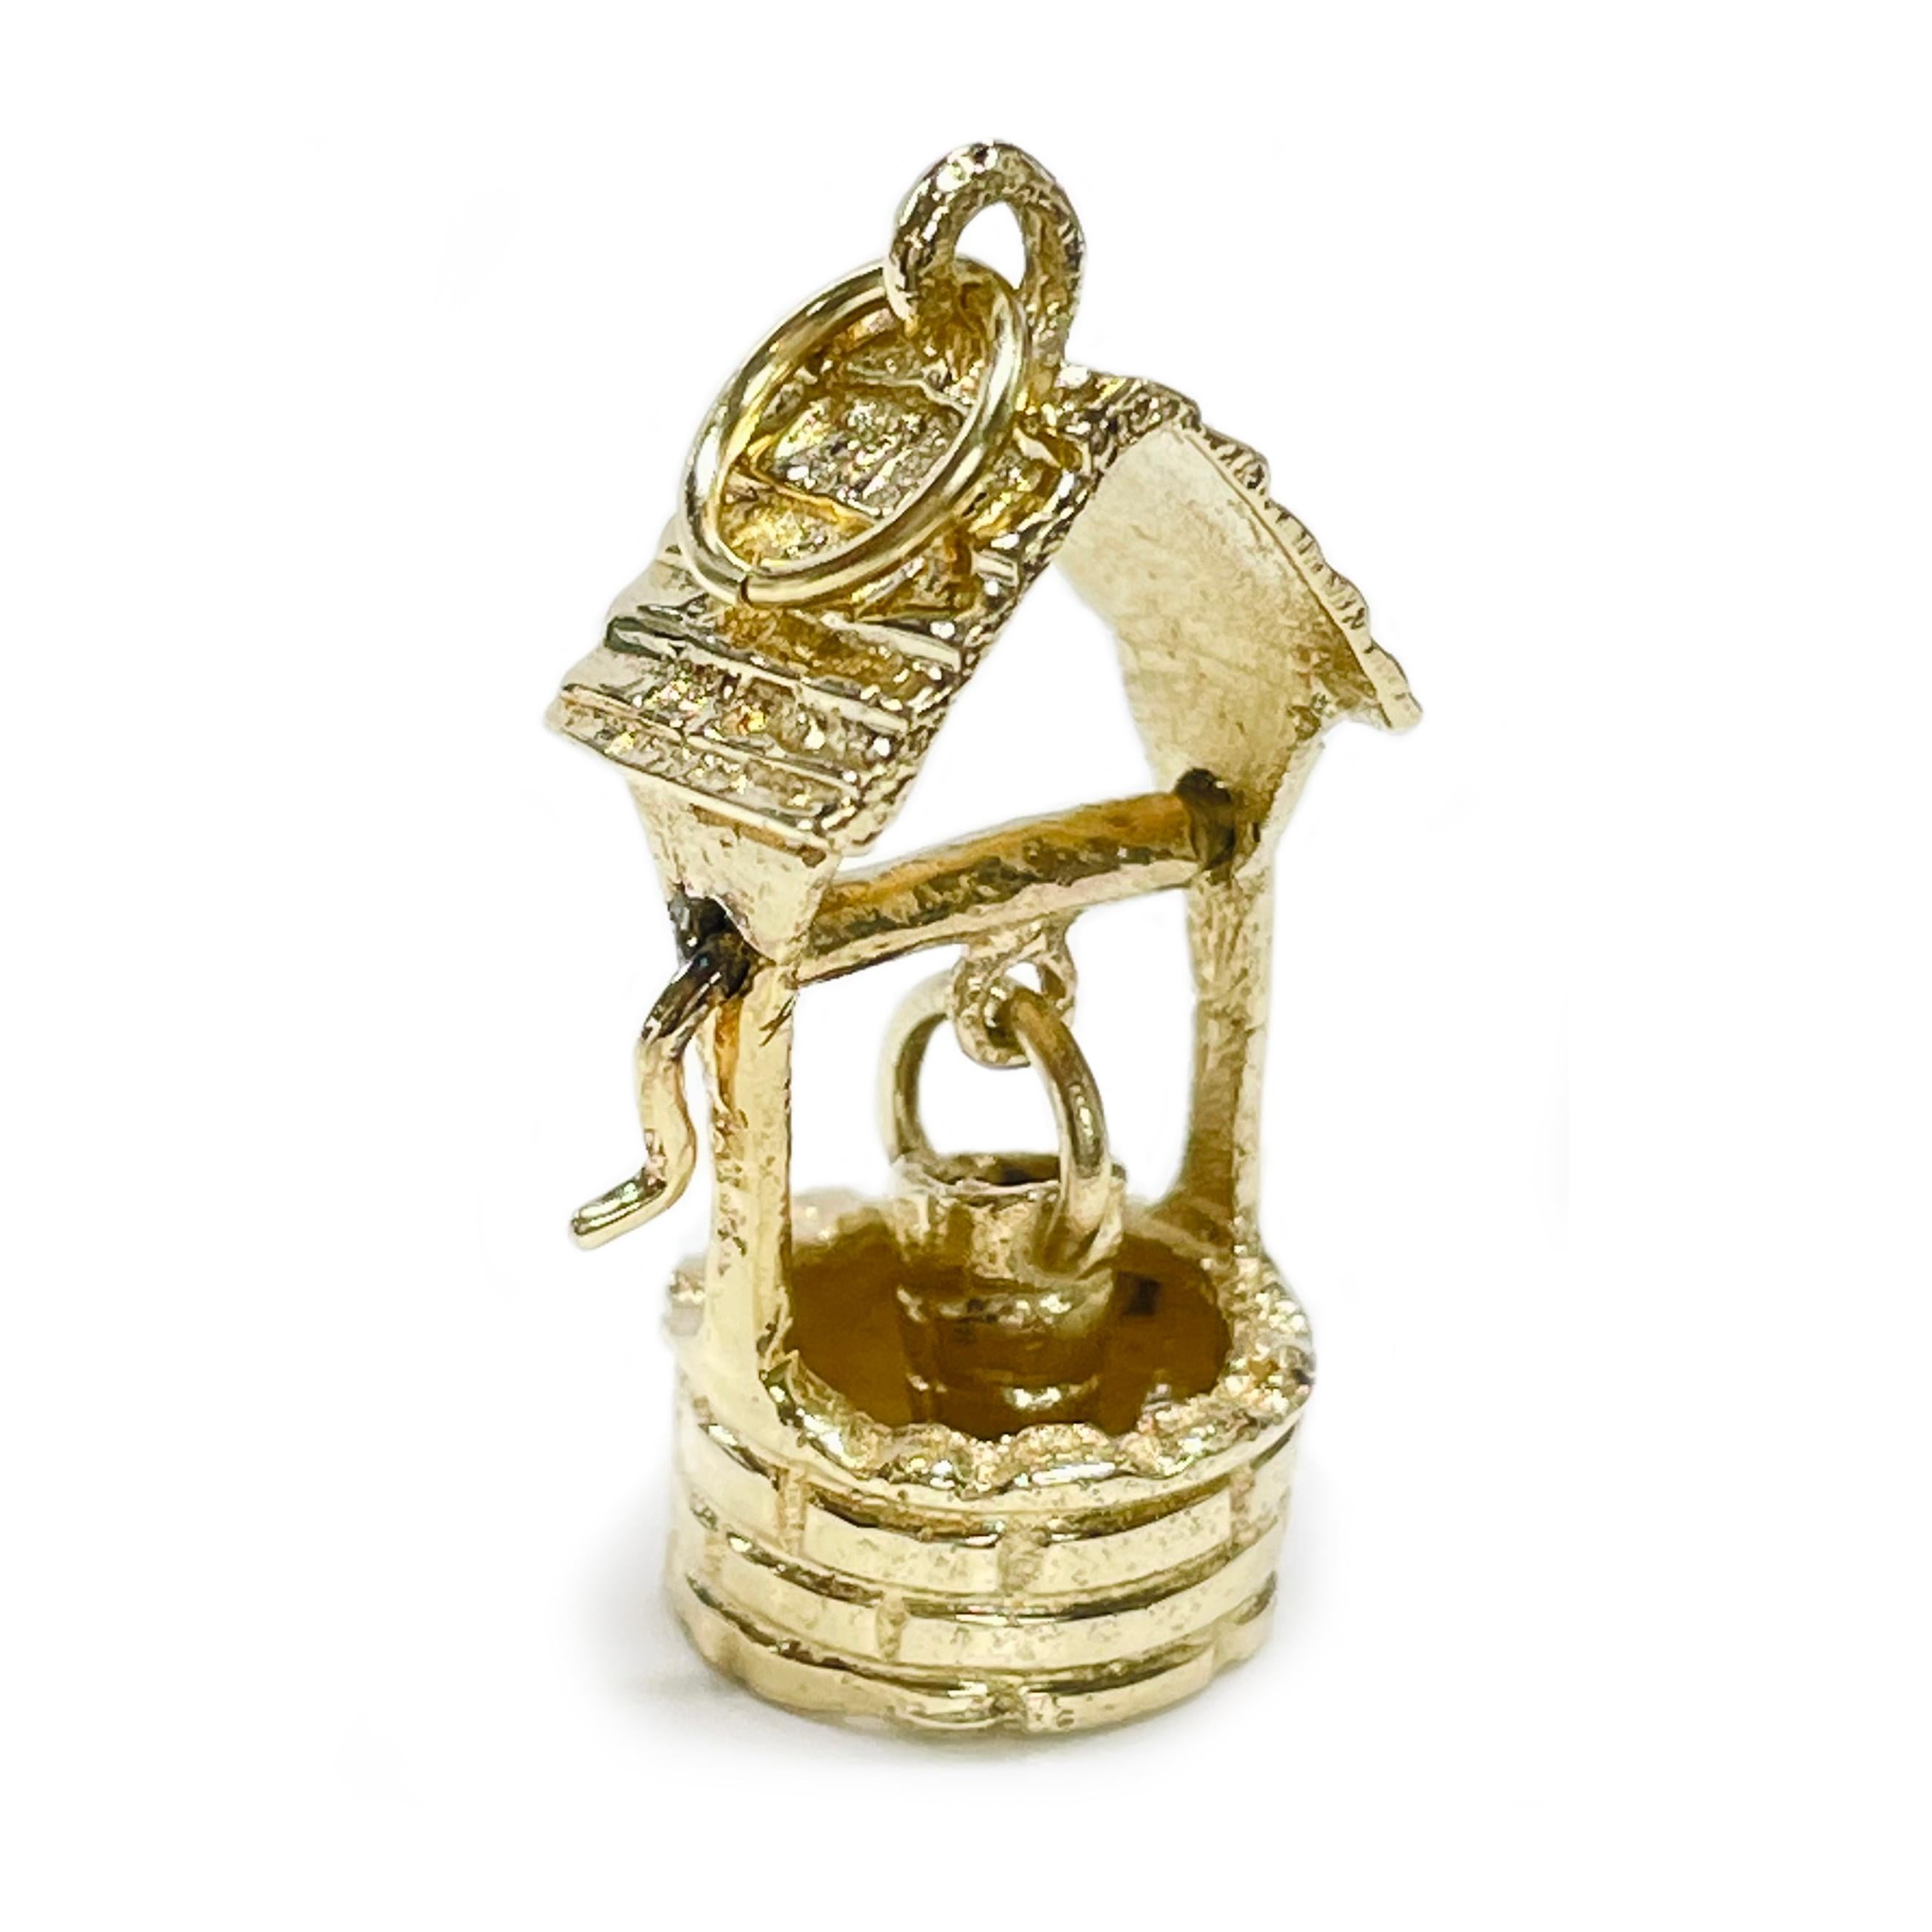 14 Karat Yellow Gold Wishing Well Pendant. This adorable pendant has a moving handle and delicately swaying bucket. The pendant measures 19 tall x 10.5mm wide. Stamped on one side of the wishing well is 14K, stamped on the other side is 14K. The